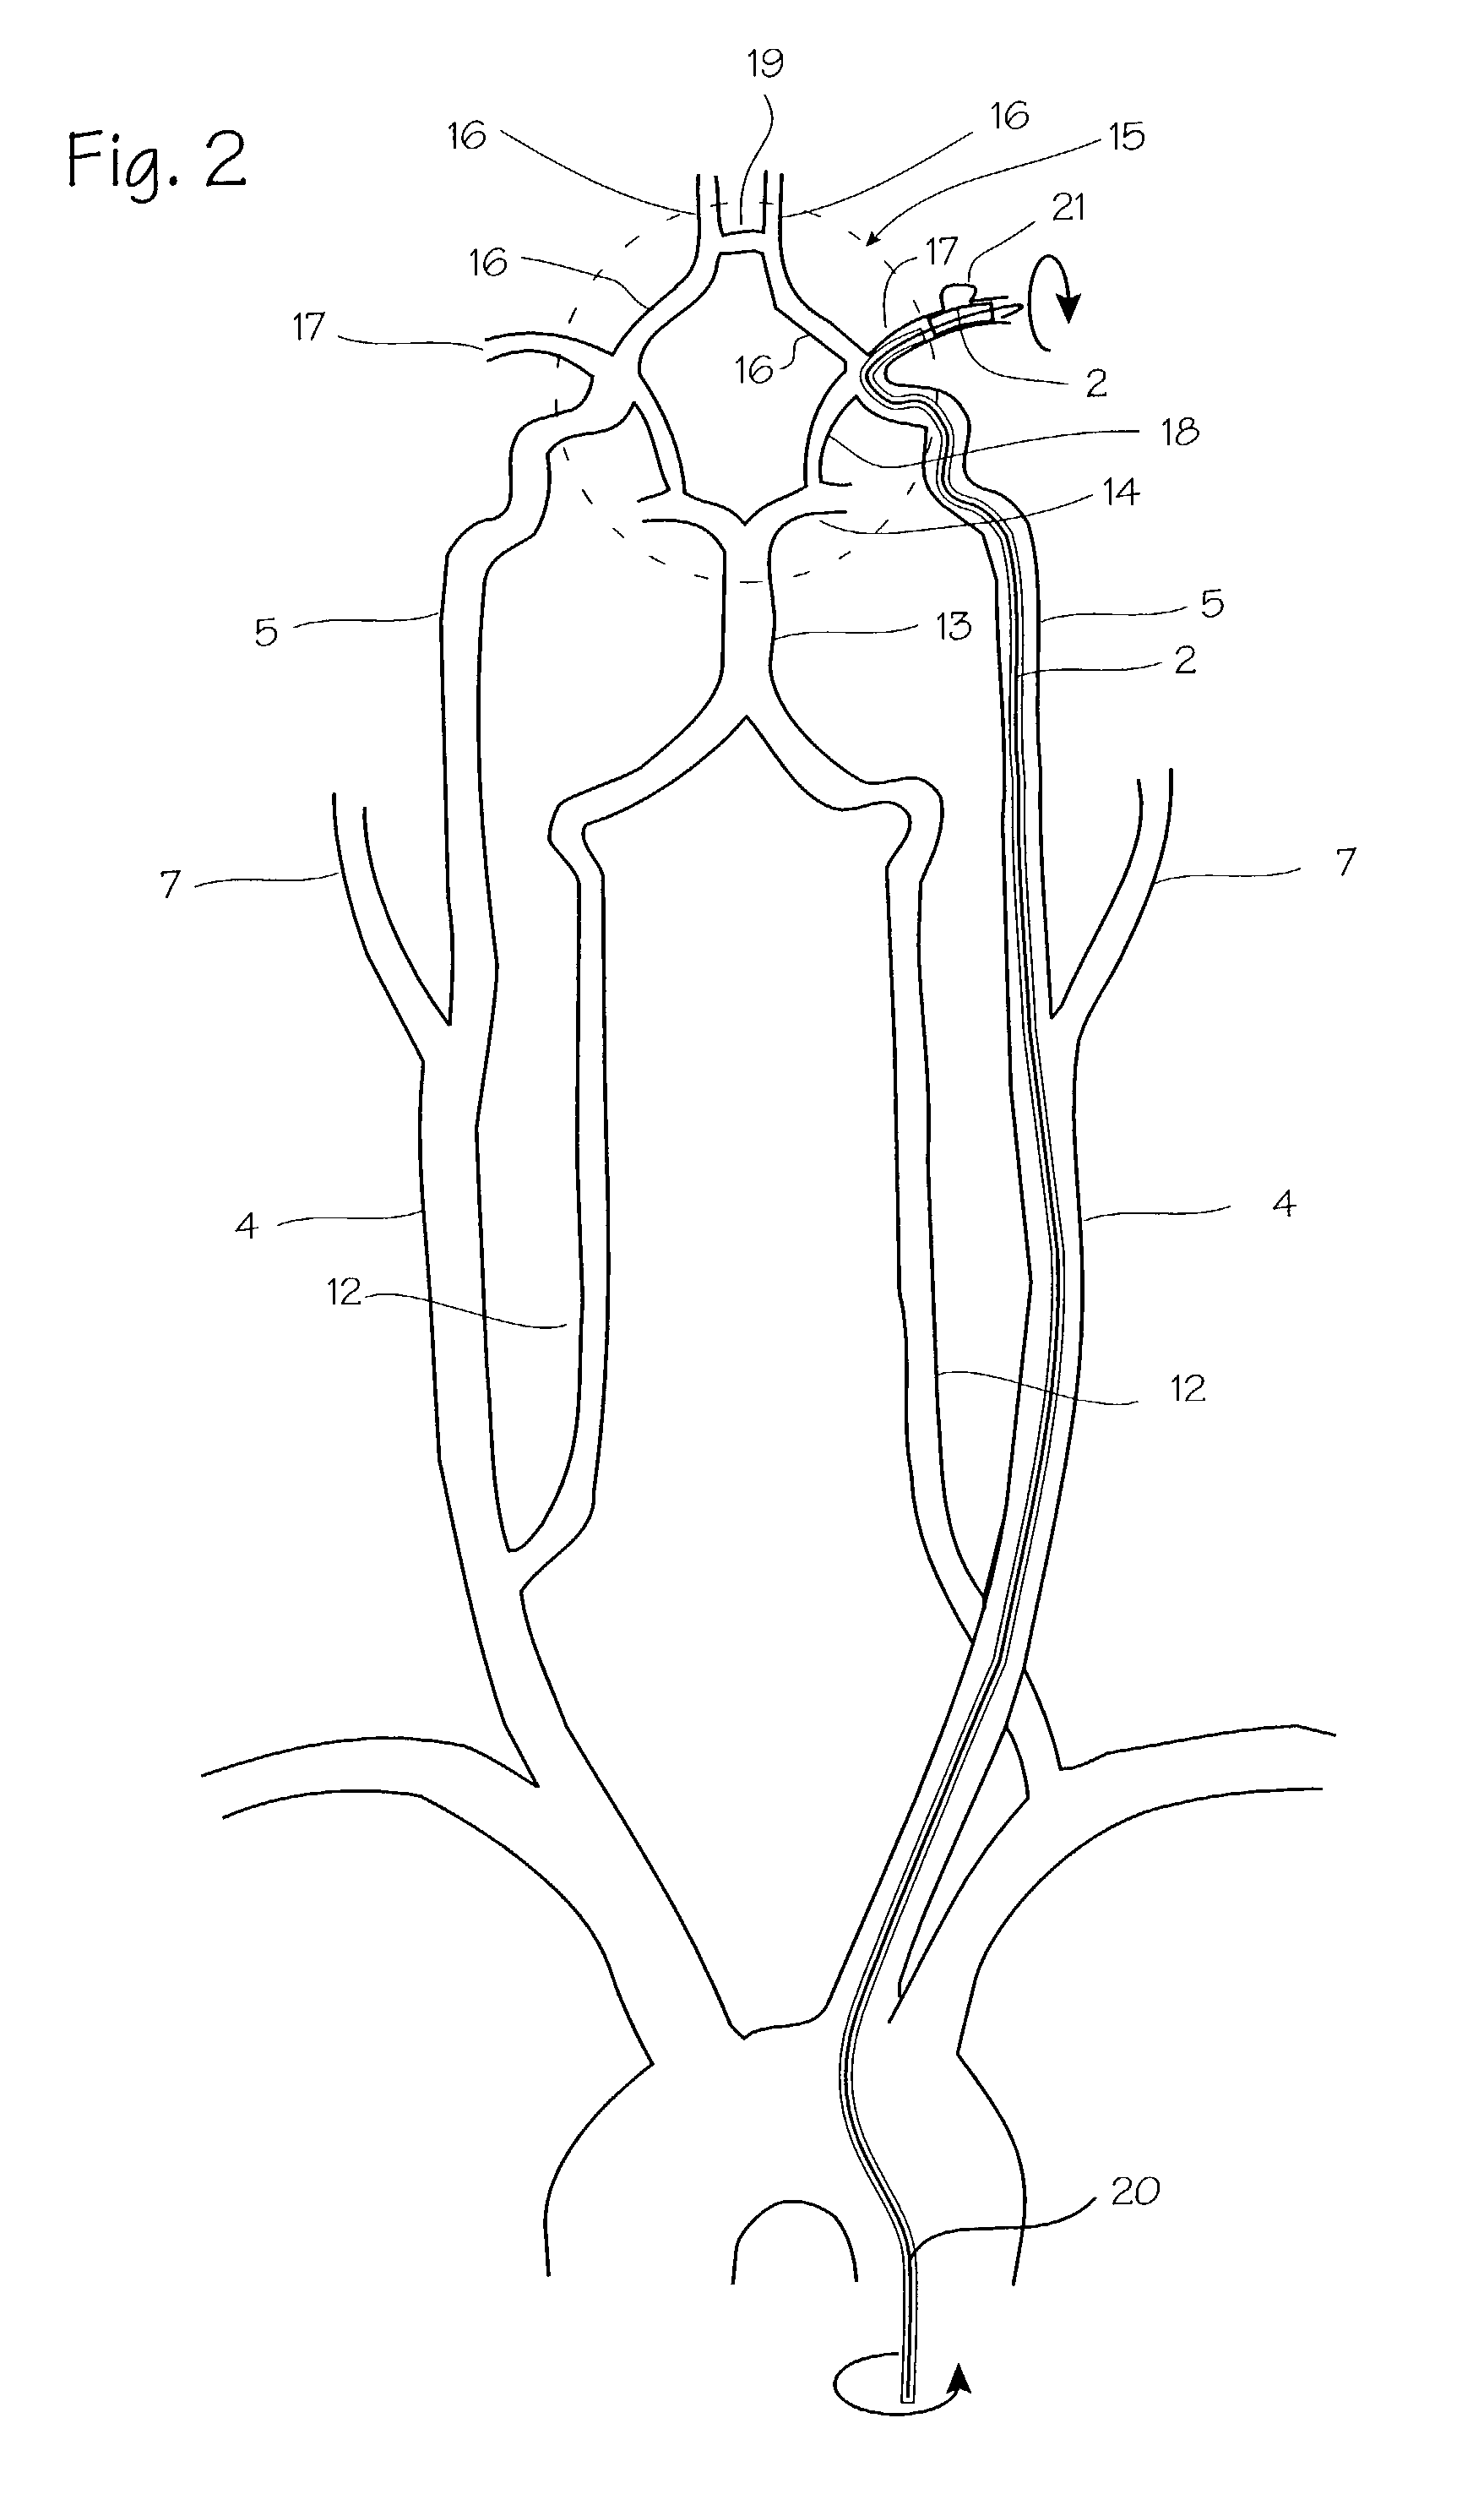 Expandable stent apparatus and method